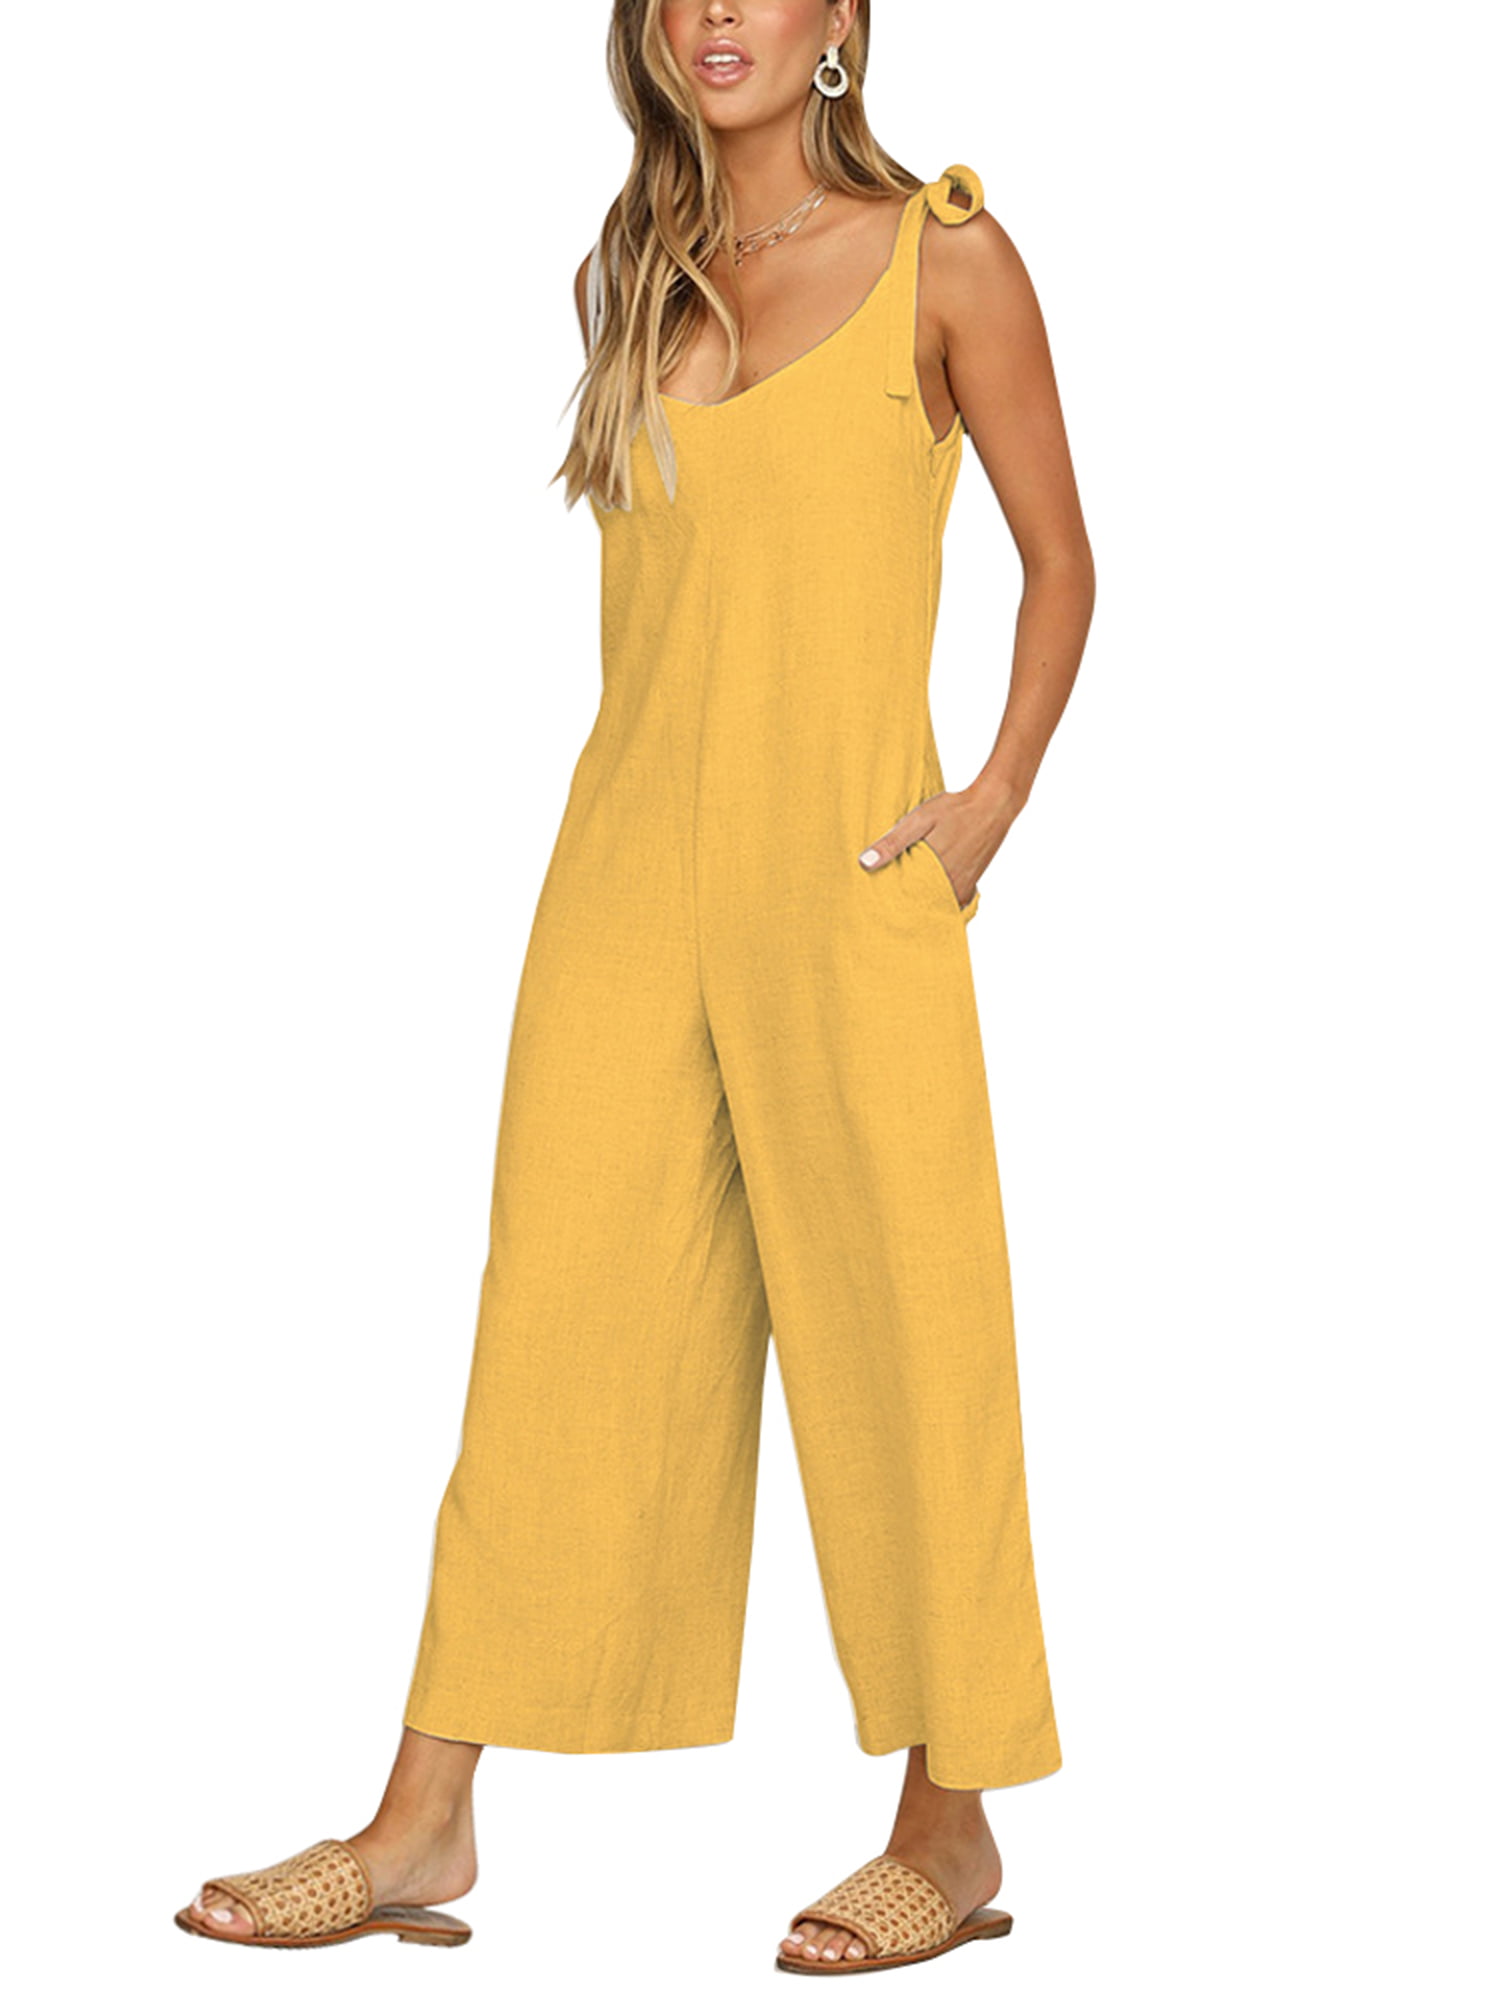 Unisex Sleeveless Casual Loose Dungarees Oversize Romper Baggy Overalls Jumpsuit